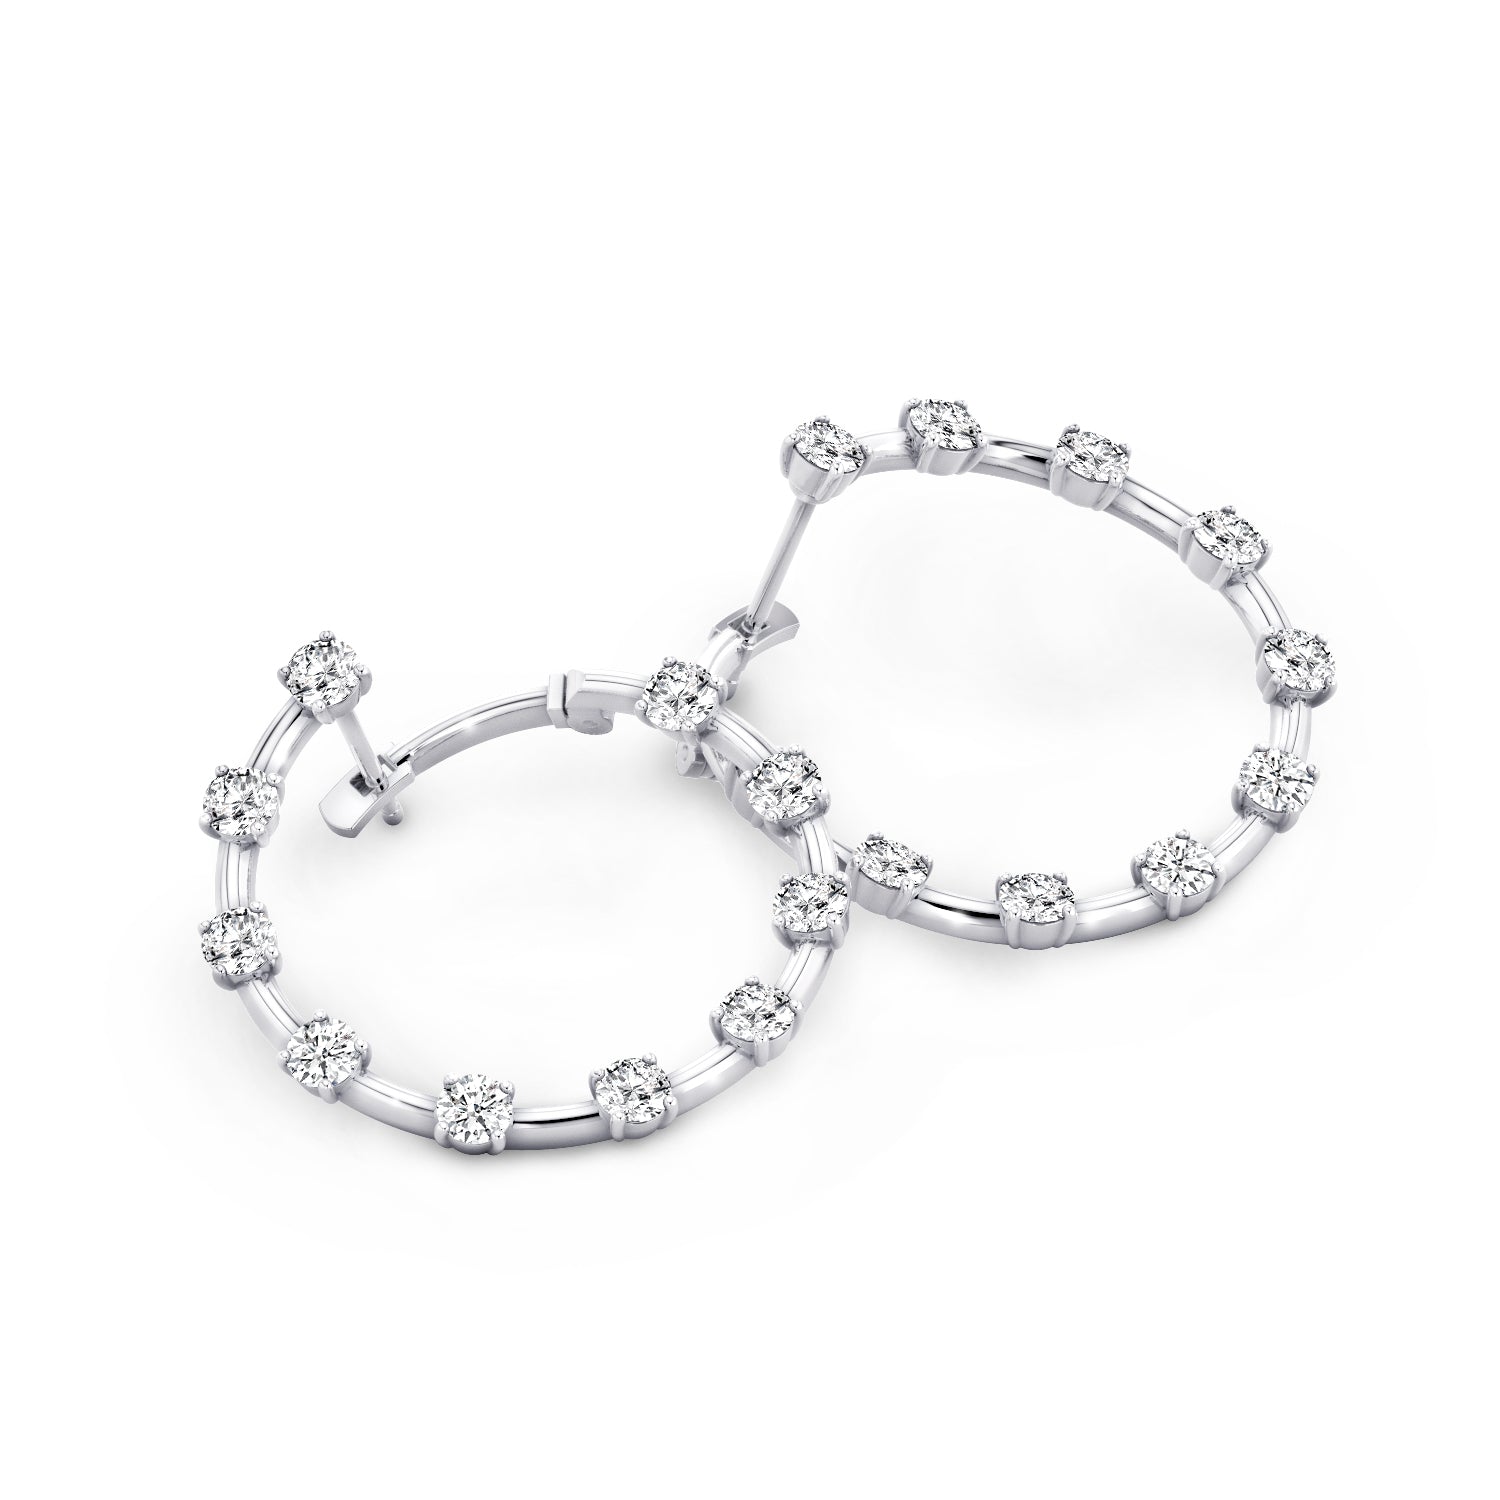 Shimansky - Crescent Diamond Hoop Earrings 2.00ct crafted in 14K White Gold